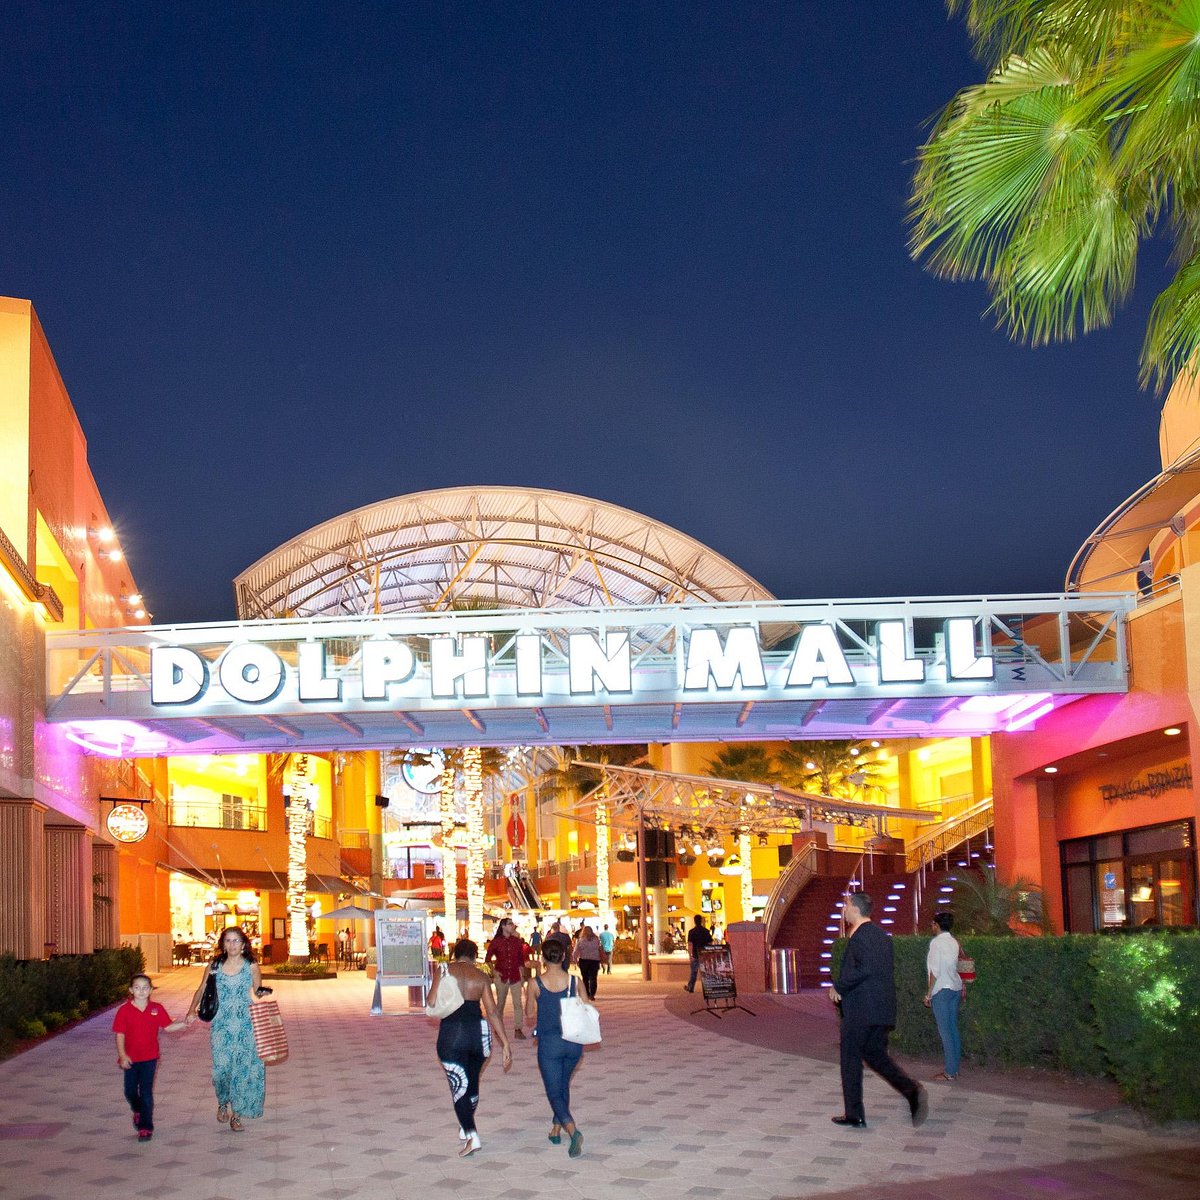 Dolphin Mall - Both Ross Dress For Less stores are now